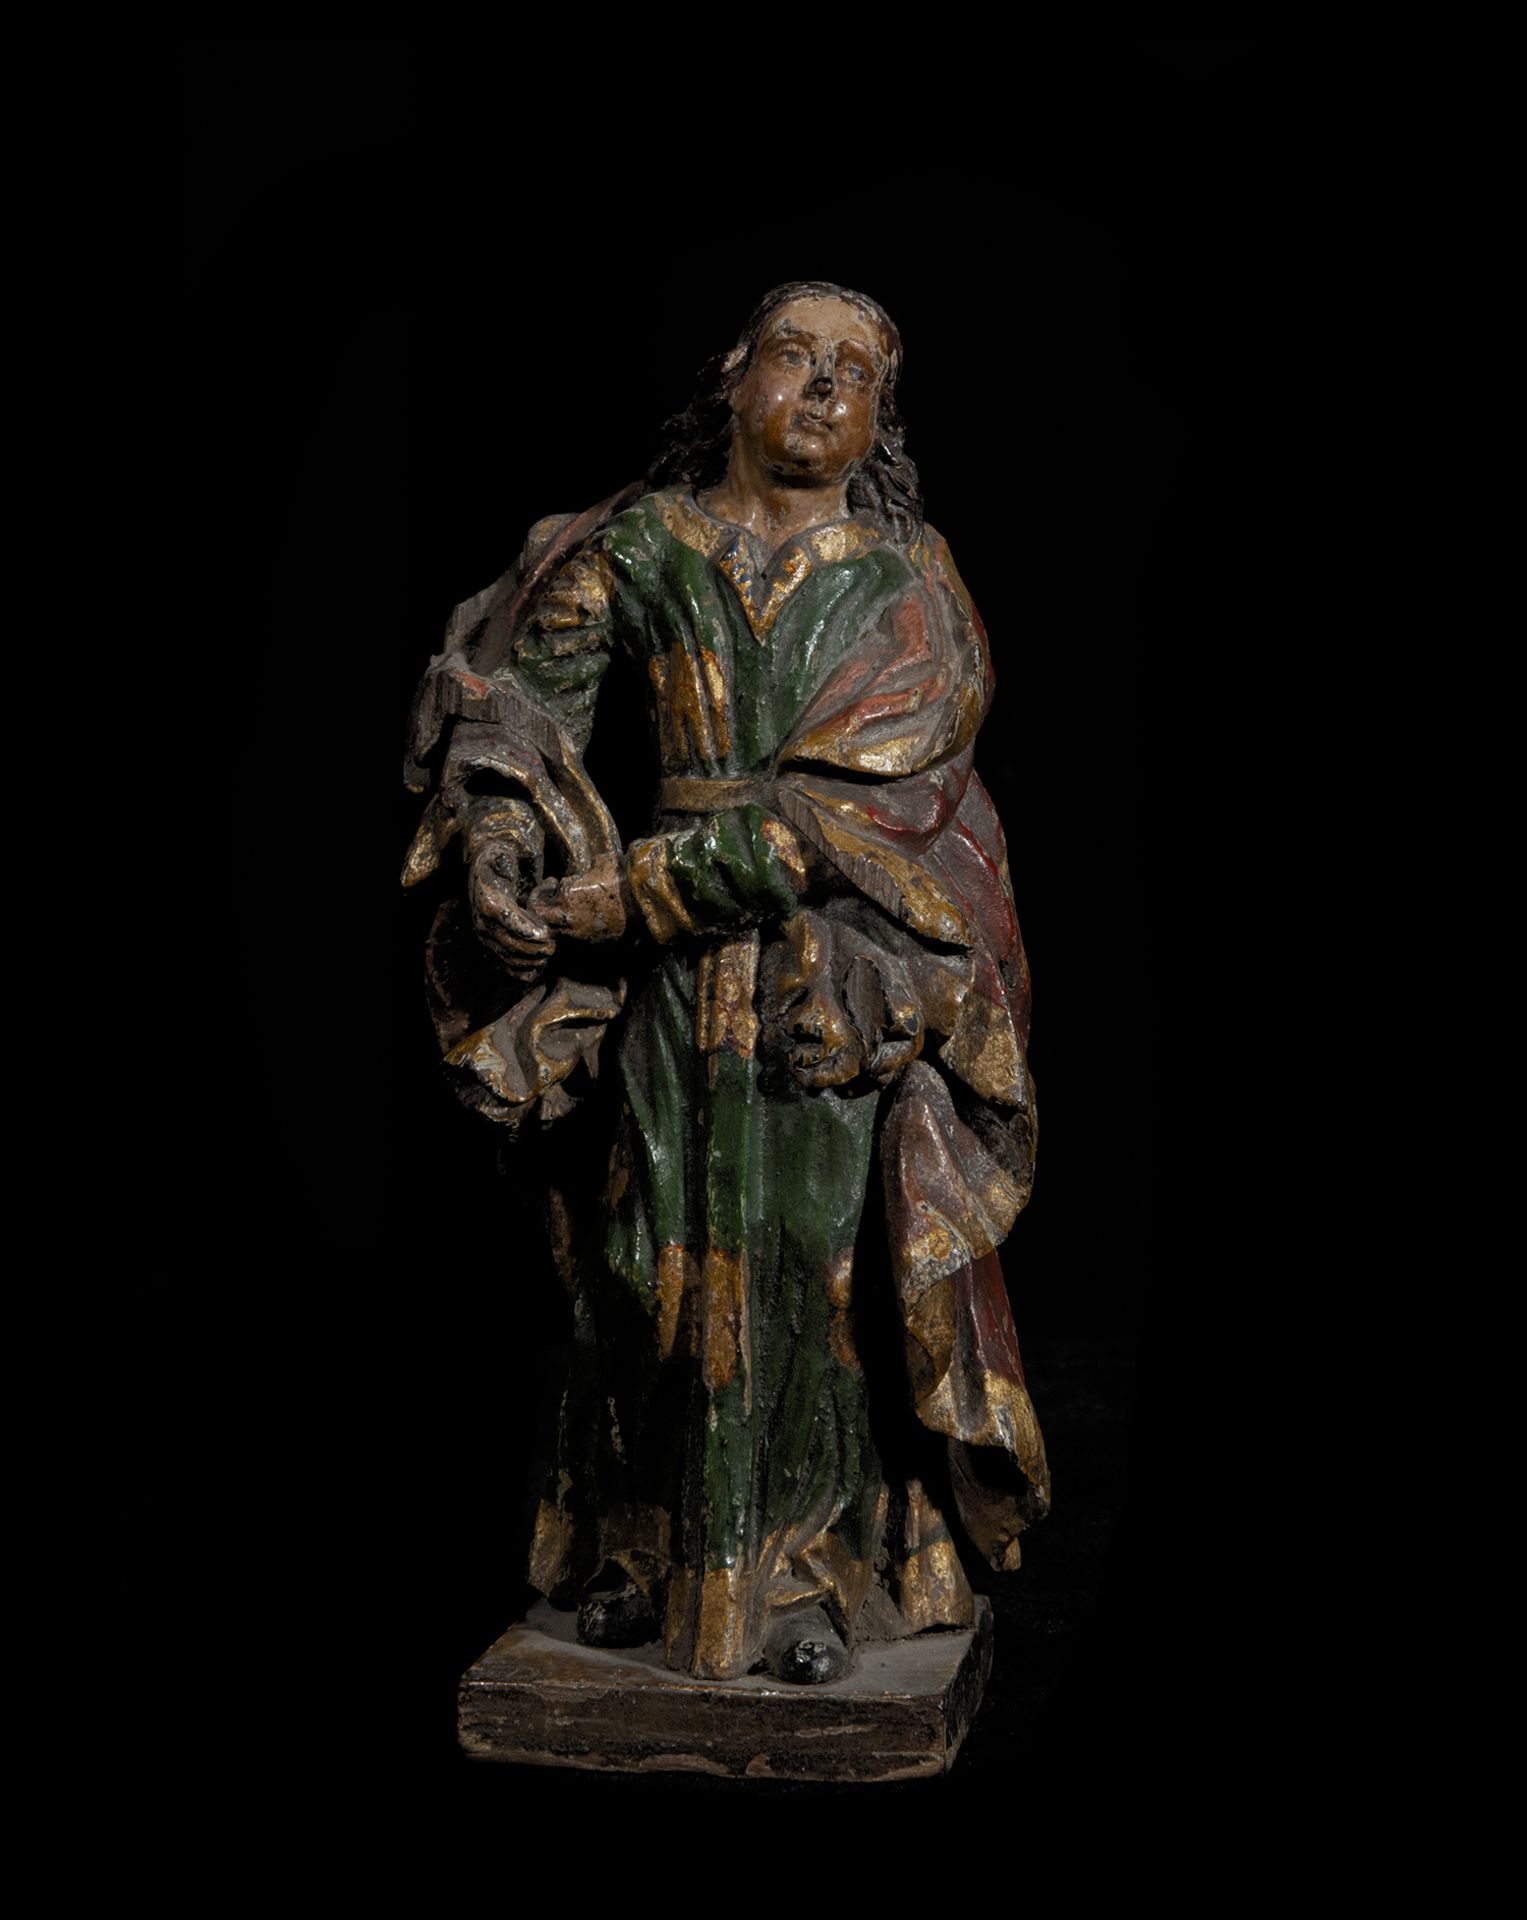 Colonial Saint John in carving, New Spain 18th century